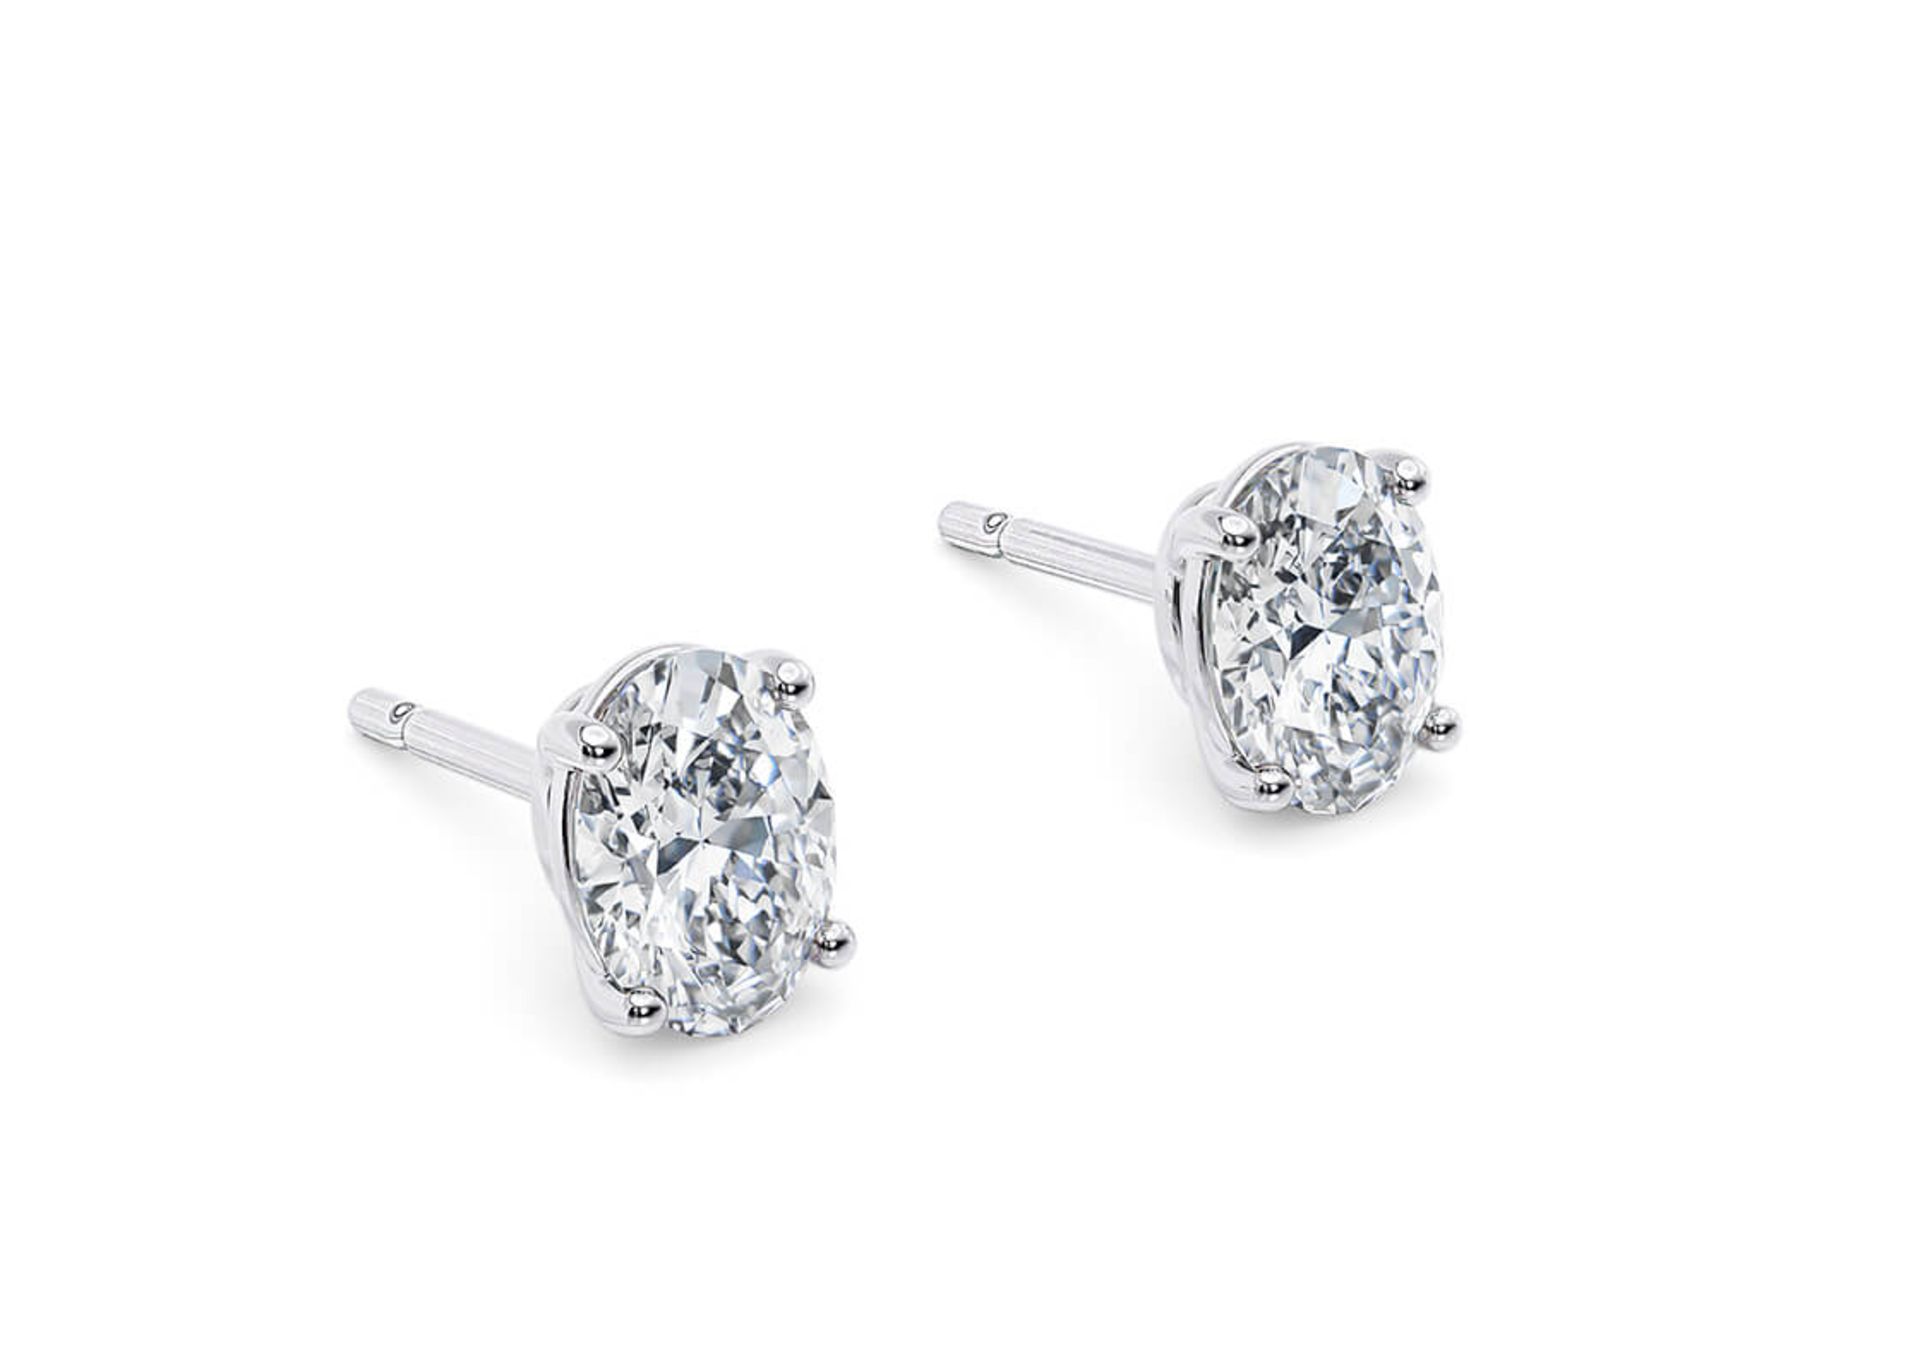 Oval Cut 4.00 Carat Natural Diamond Earrings Set in 18kt White Gold - F Colour SI Clarity - GIA - Image 2 of 3